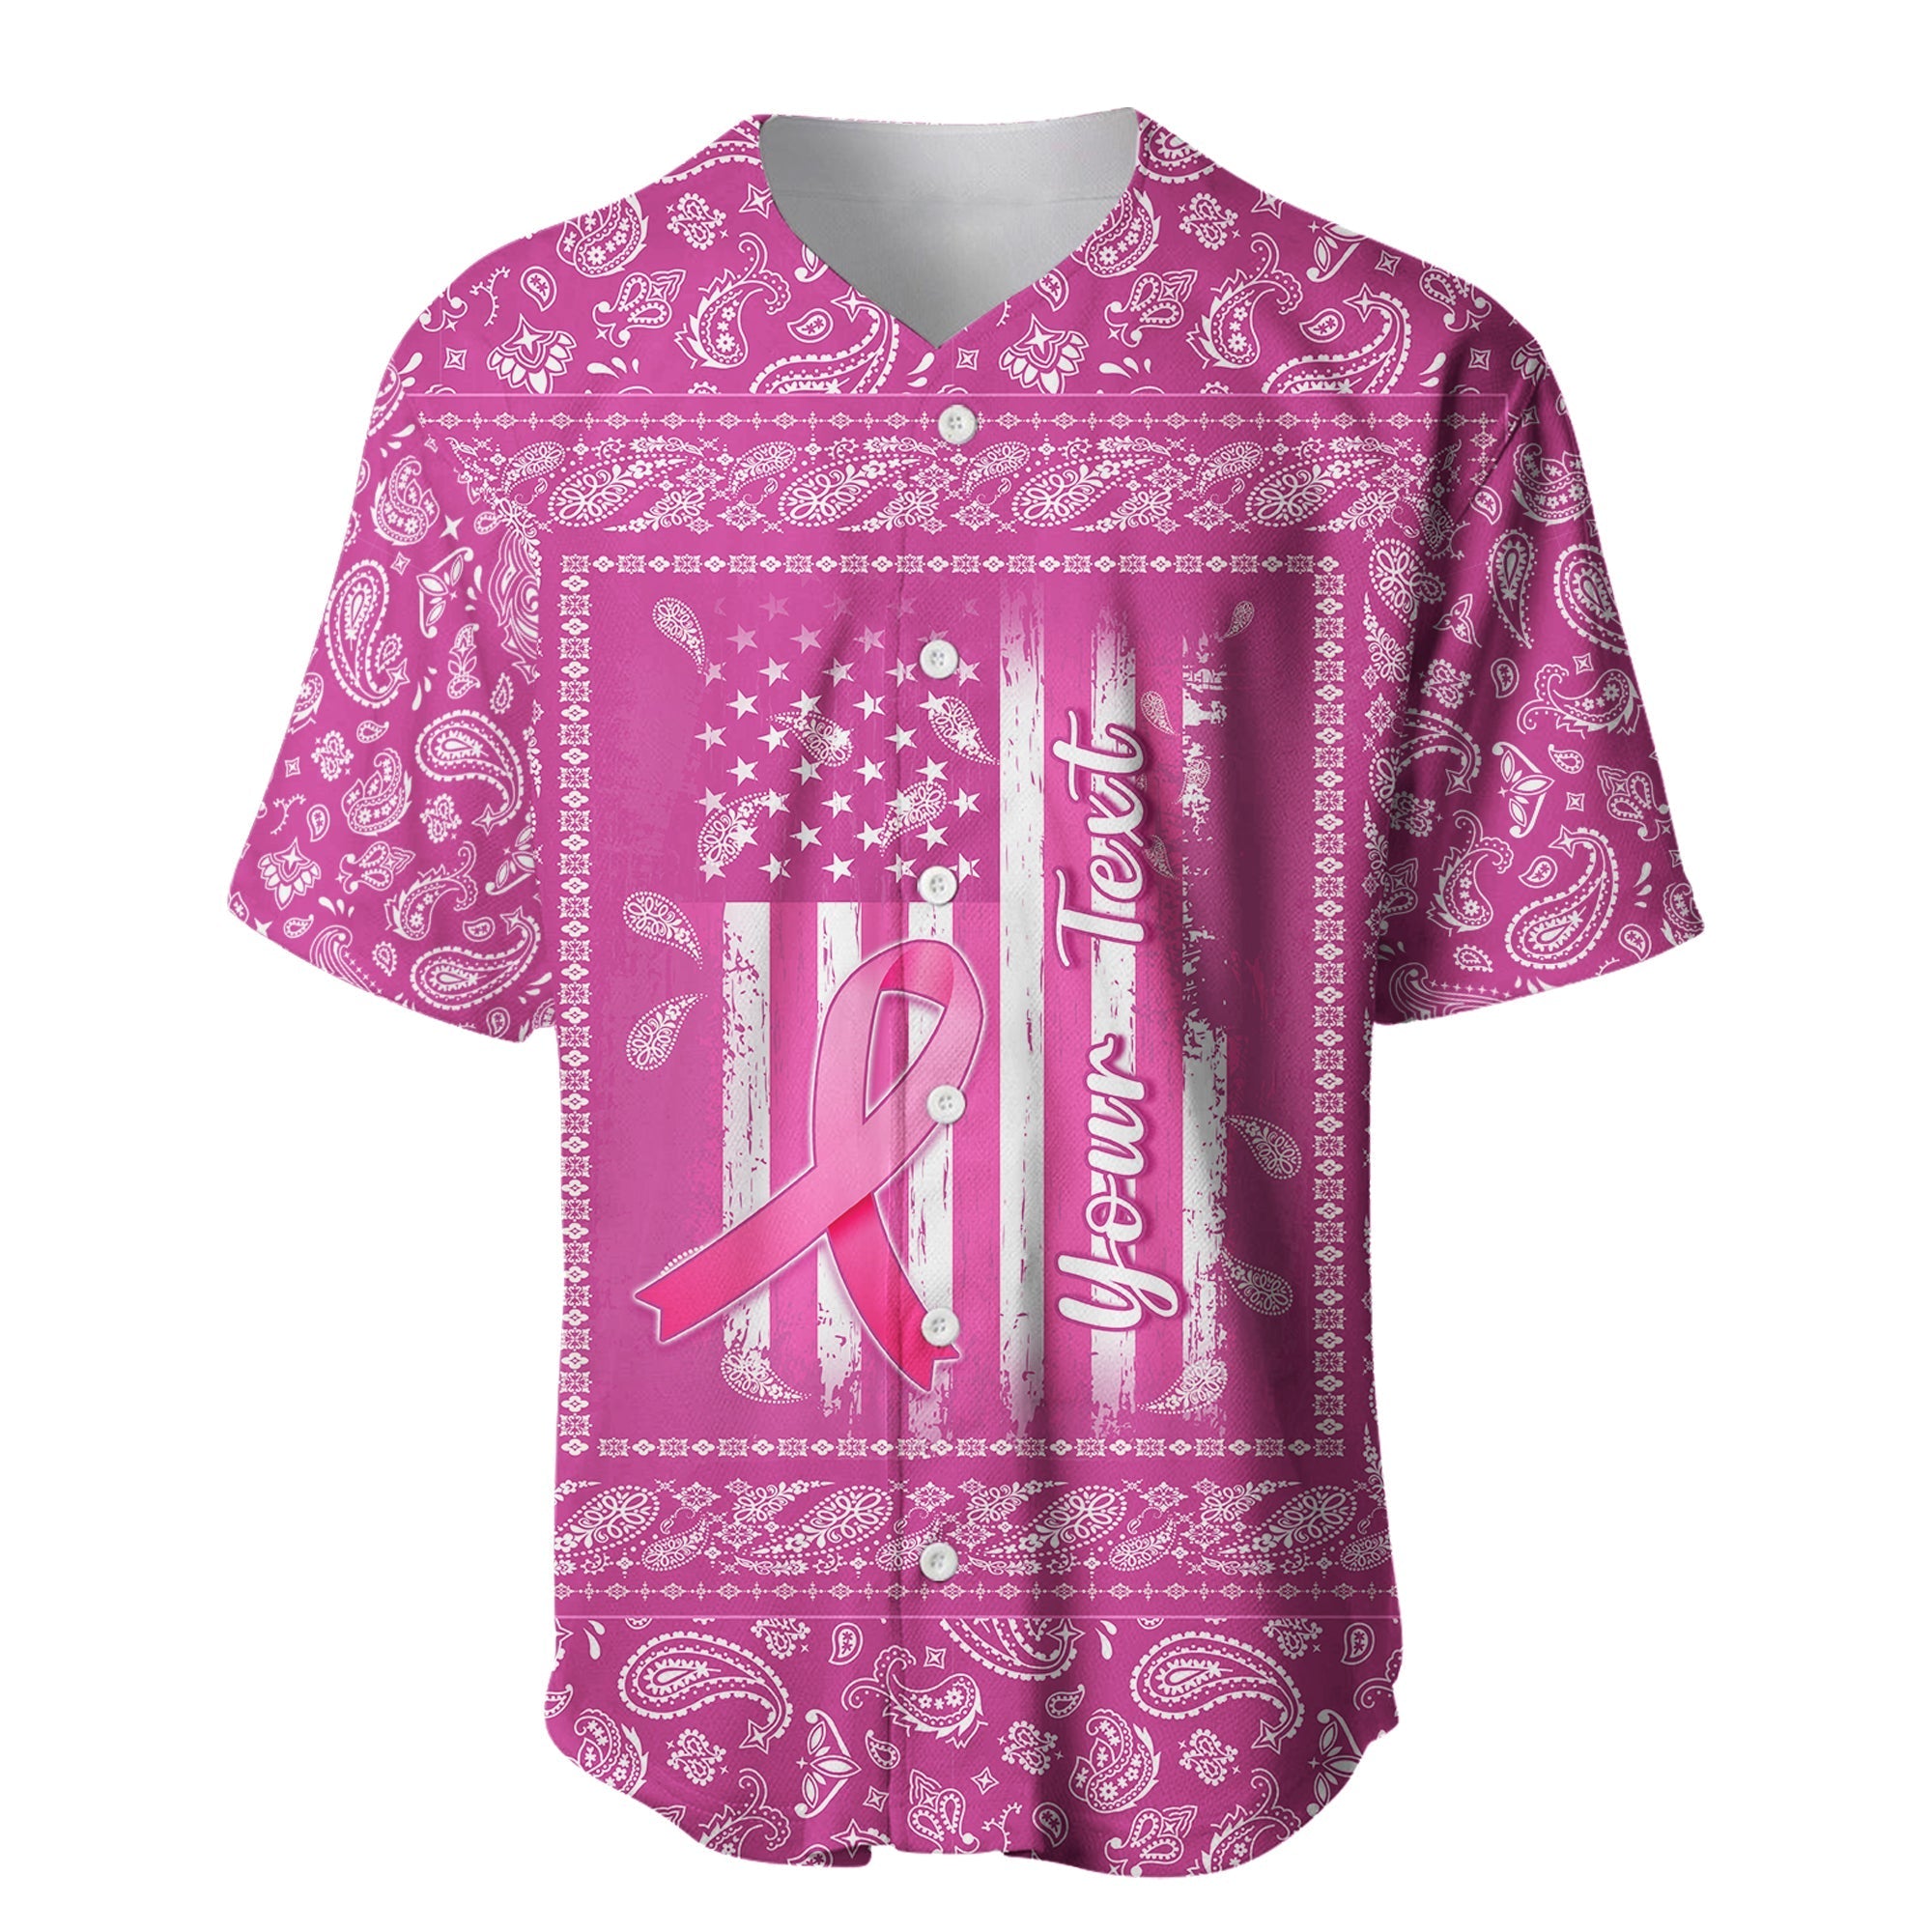 custom-personalised-breast-cancer-baseball-jersey-pink-paisley-pattern-in-october-we-wear-pink